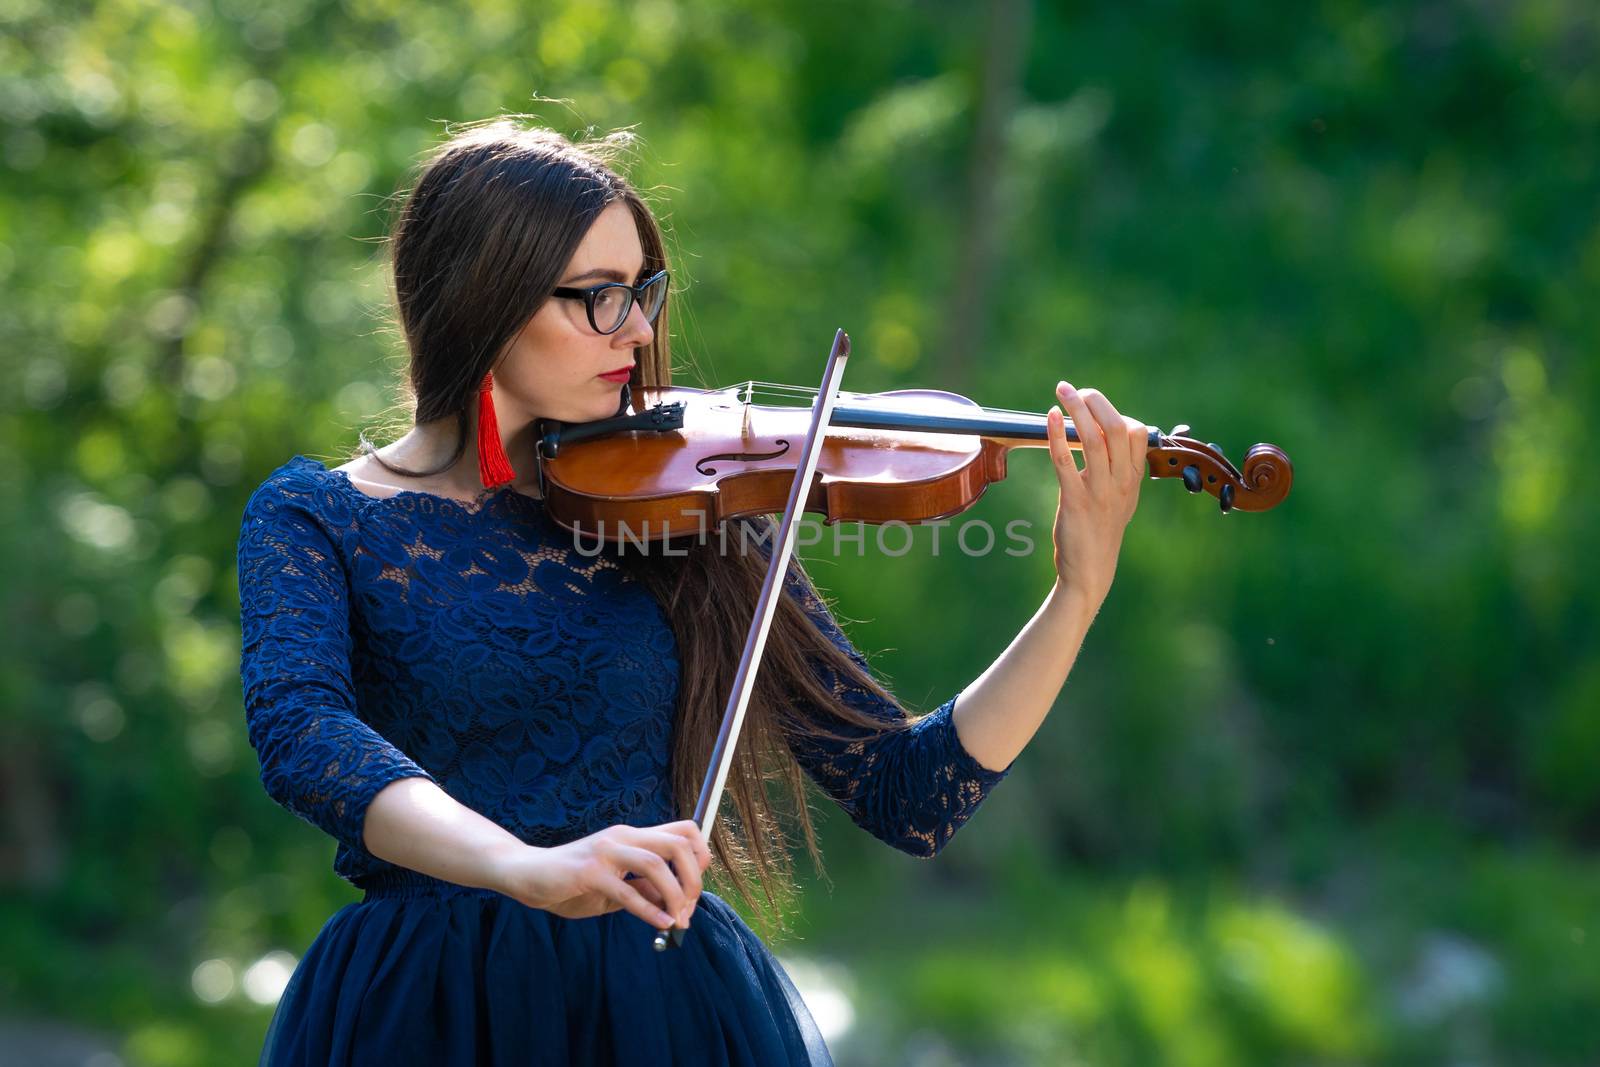 Young woman playing the violin at park. Shallow depth of field.